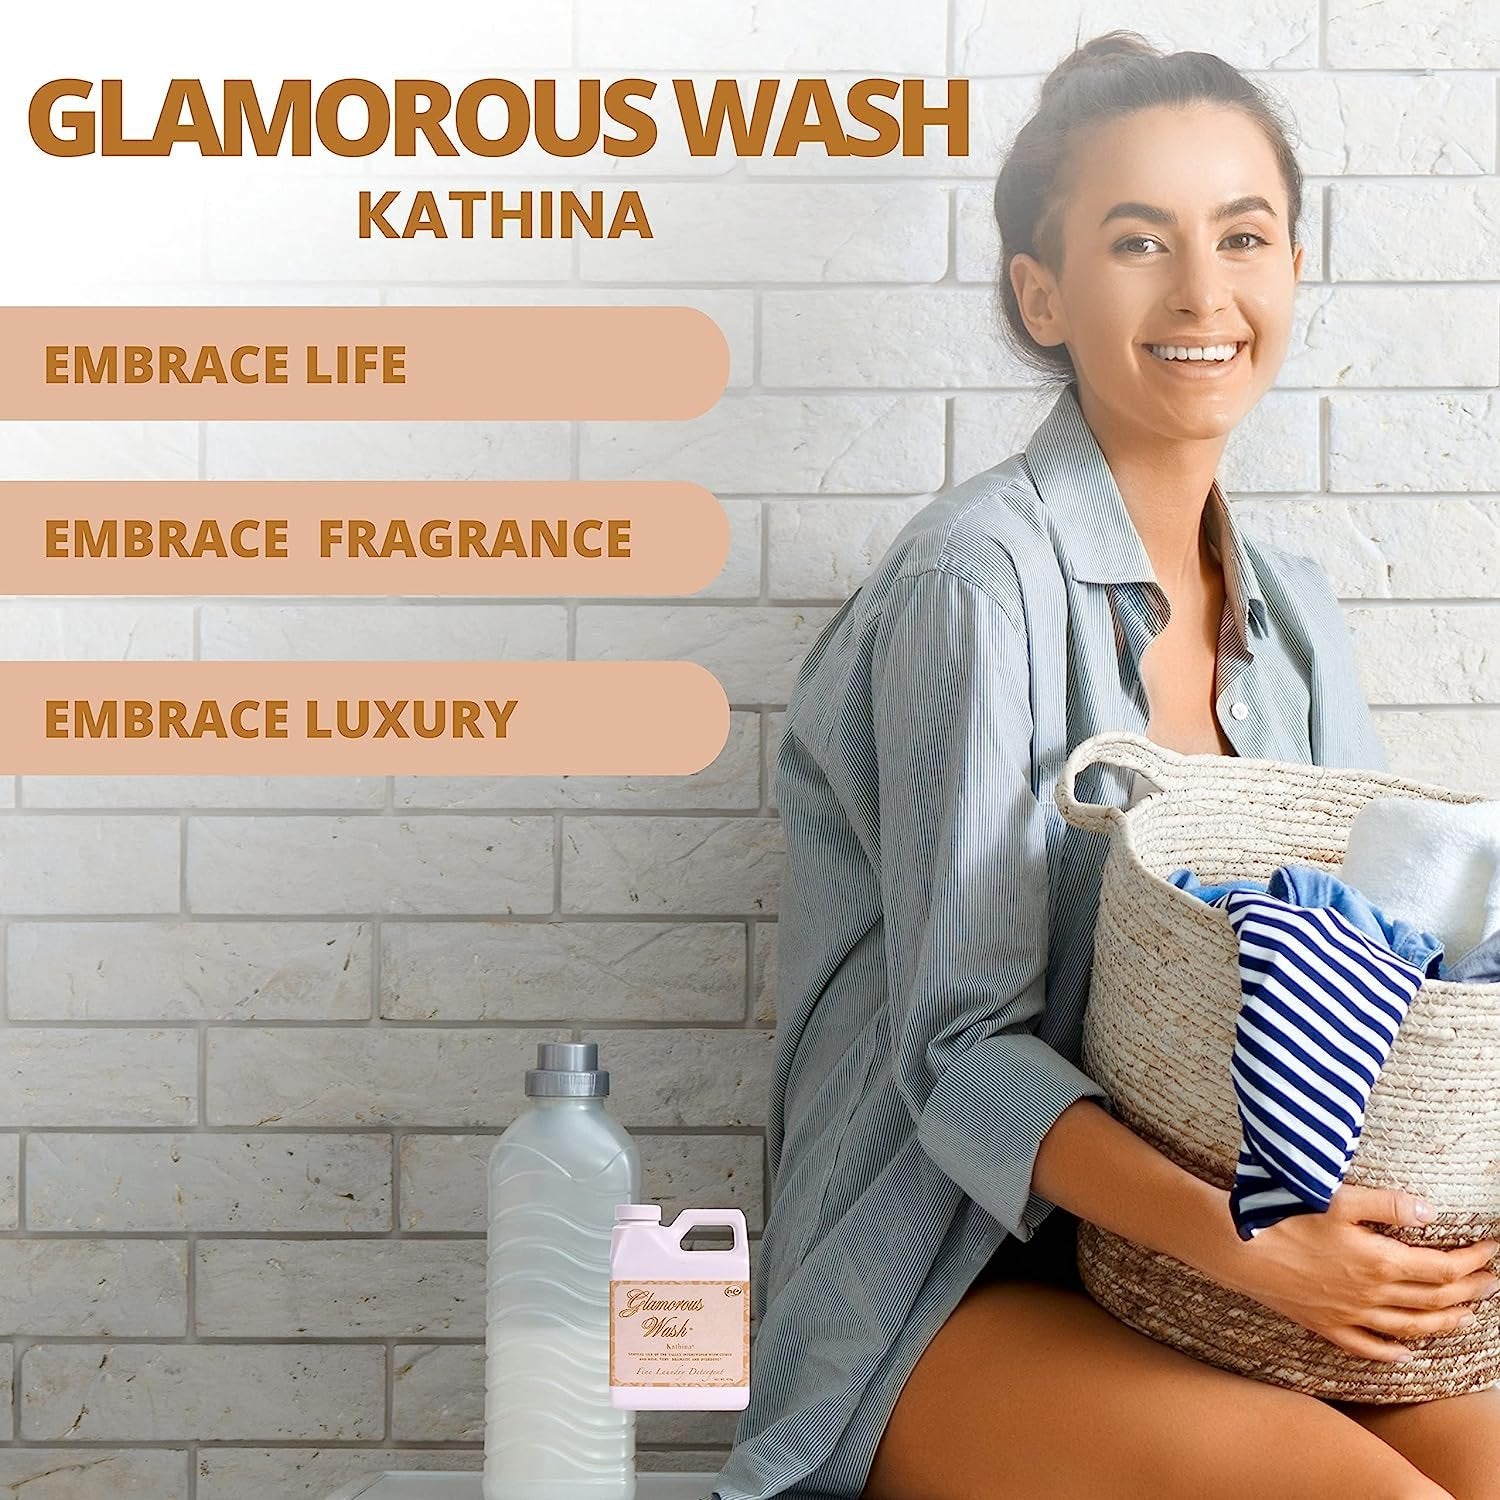 Tyler Candle Company Glamorous Wash Kathina Scent Fine Laundry Liquid Detergent - Liquid Laundry Detergent for Clothing - Hand and Machine Washable - 32 oz, 907-grams Container with Bonus Key Chain